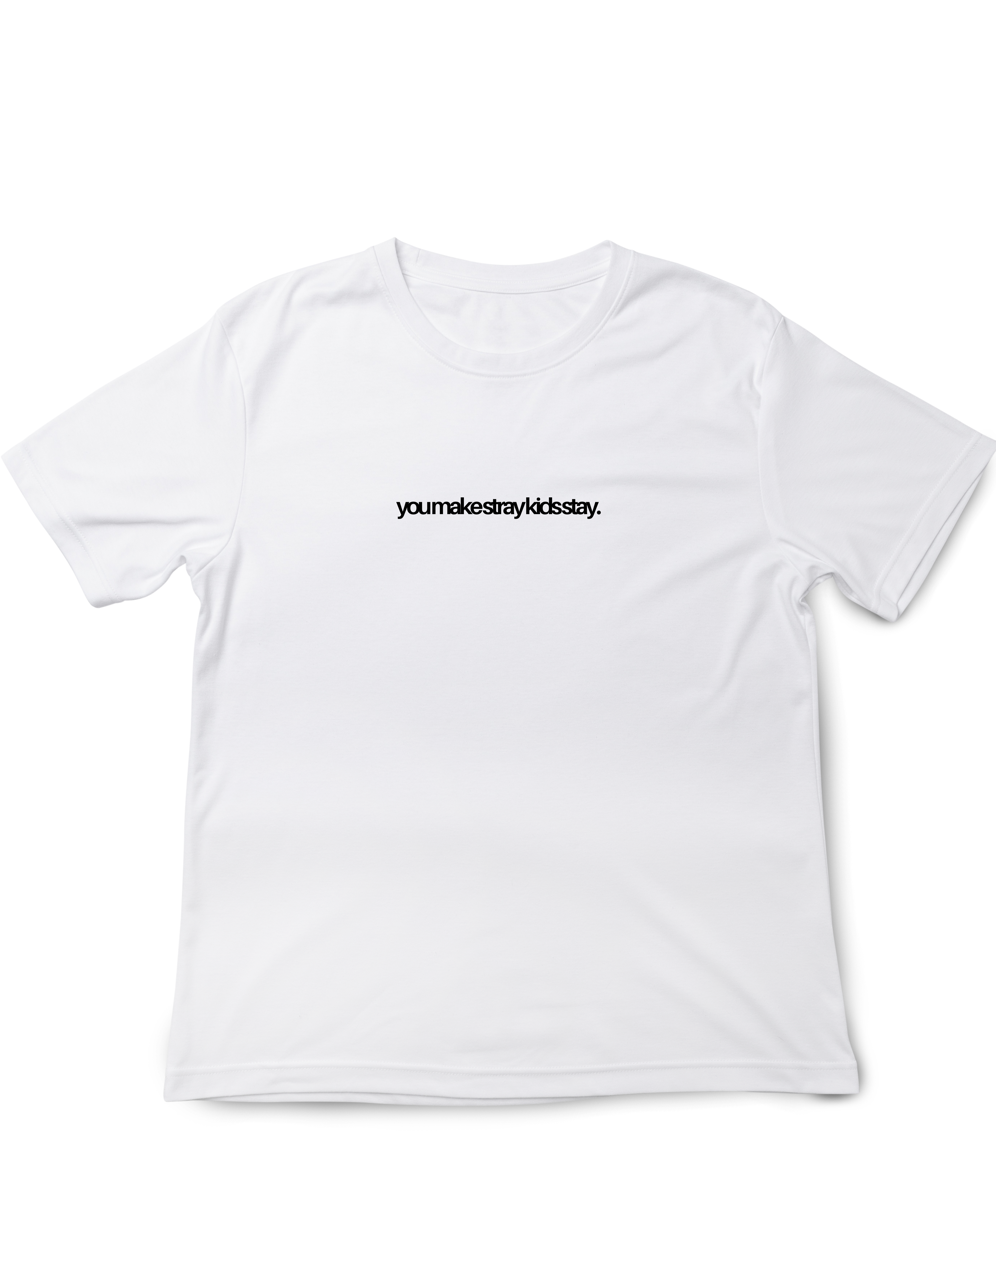 Stray Kids Discography T-Shirt